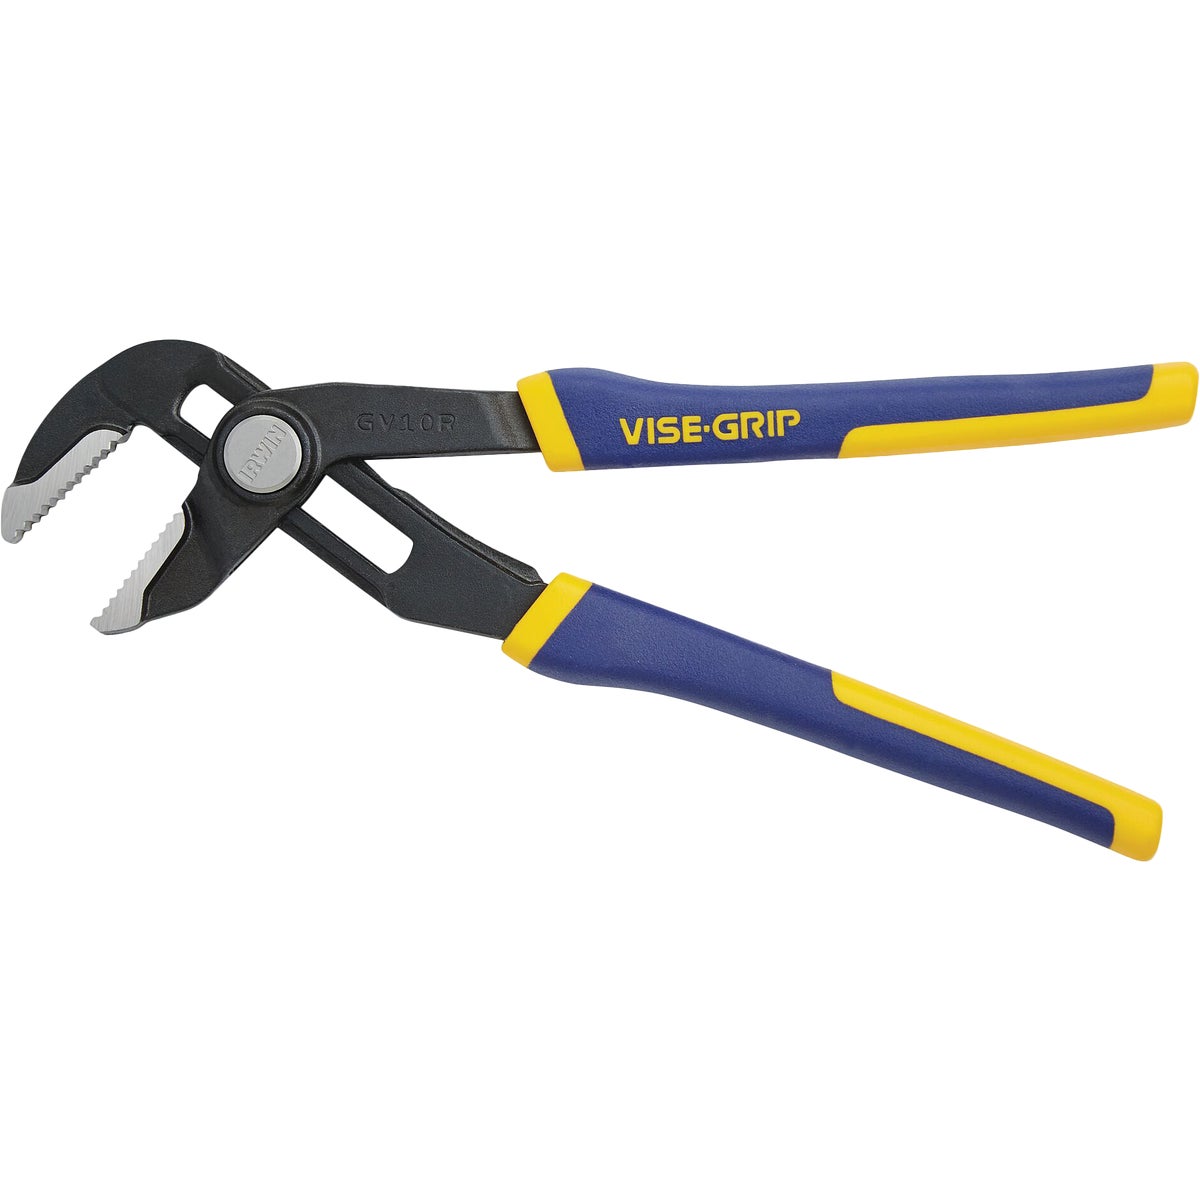 Irwin Vise-Grip 10 In. Straight Jaw GrooveLock Groove Joint Pliers